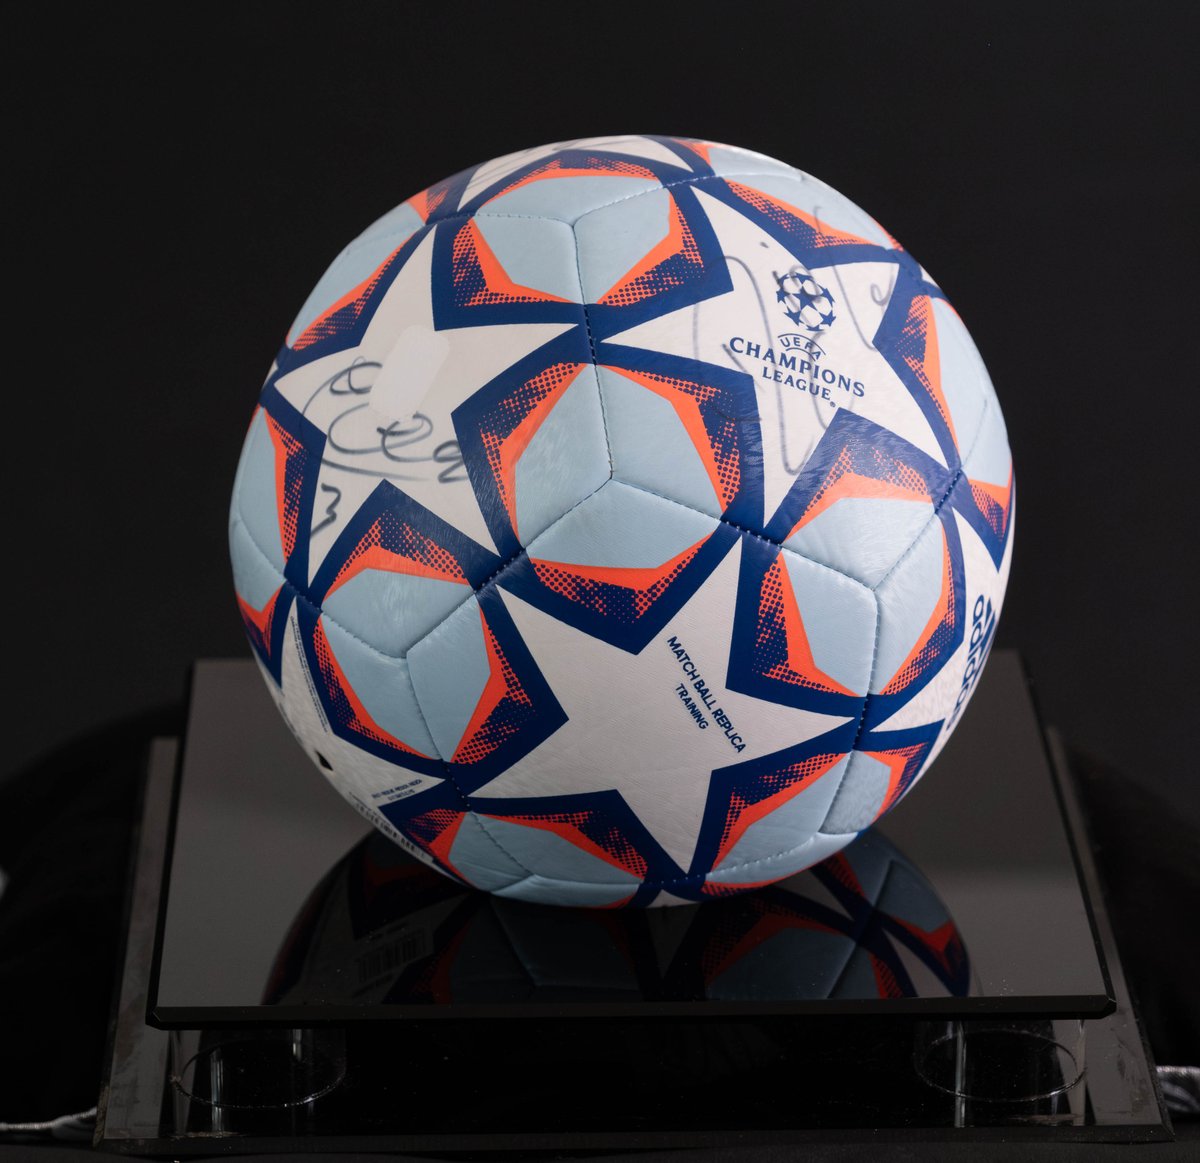 🕵️‍♀️ Have you seen this auction piece up for grabs? ⚽ Authentic Signed Official UEFA Champions League 2020/21 Football signed by Juventus! 🌟 Don't miss your chance to grab a piece of history.👊 Be a champ and make a difference! 💪 Starting Bid just £1️⃣9️⃣0️⃣ 👇